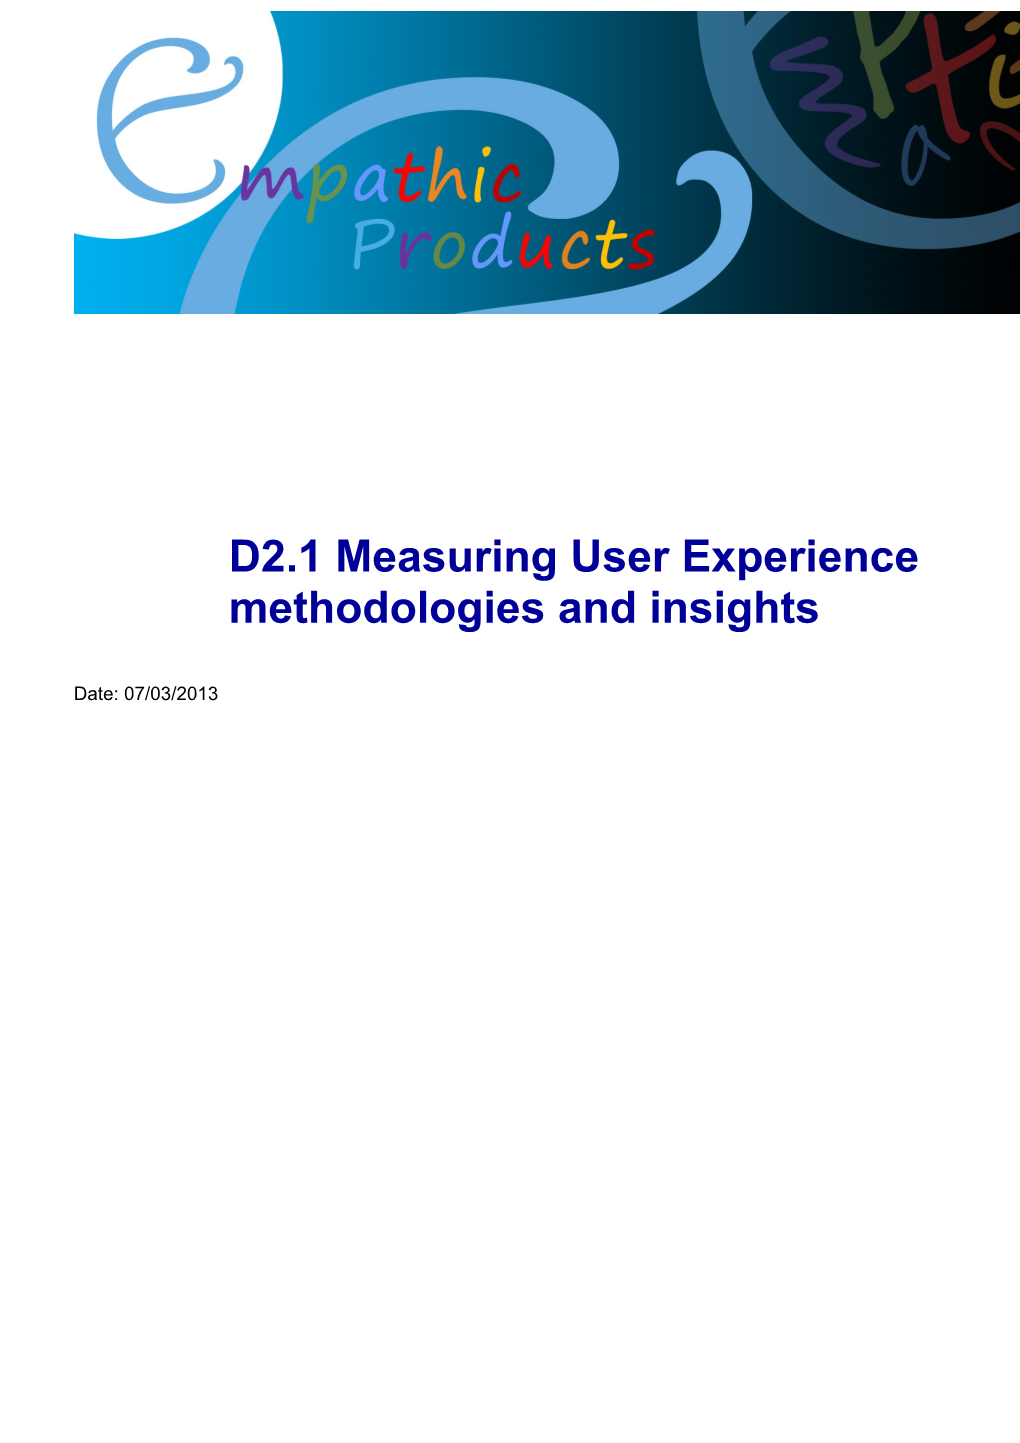 D2.1 Measuring User Experience Methodologies and Insights